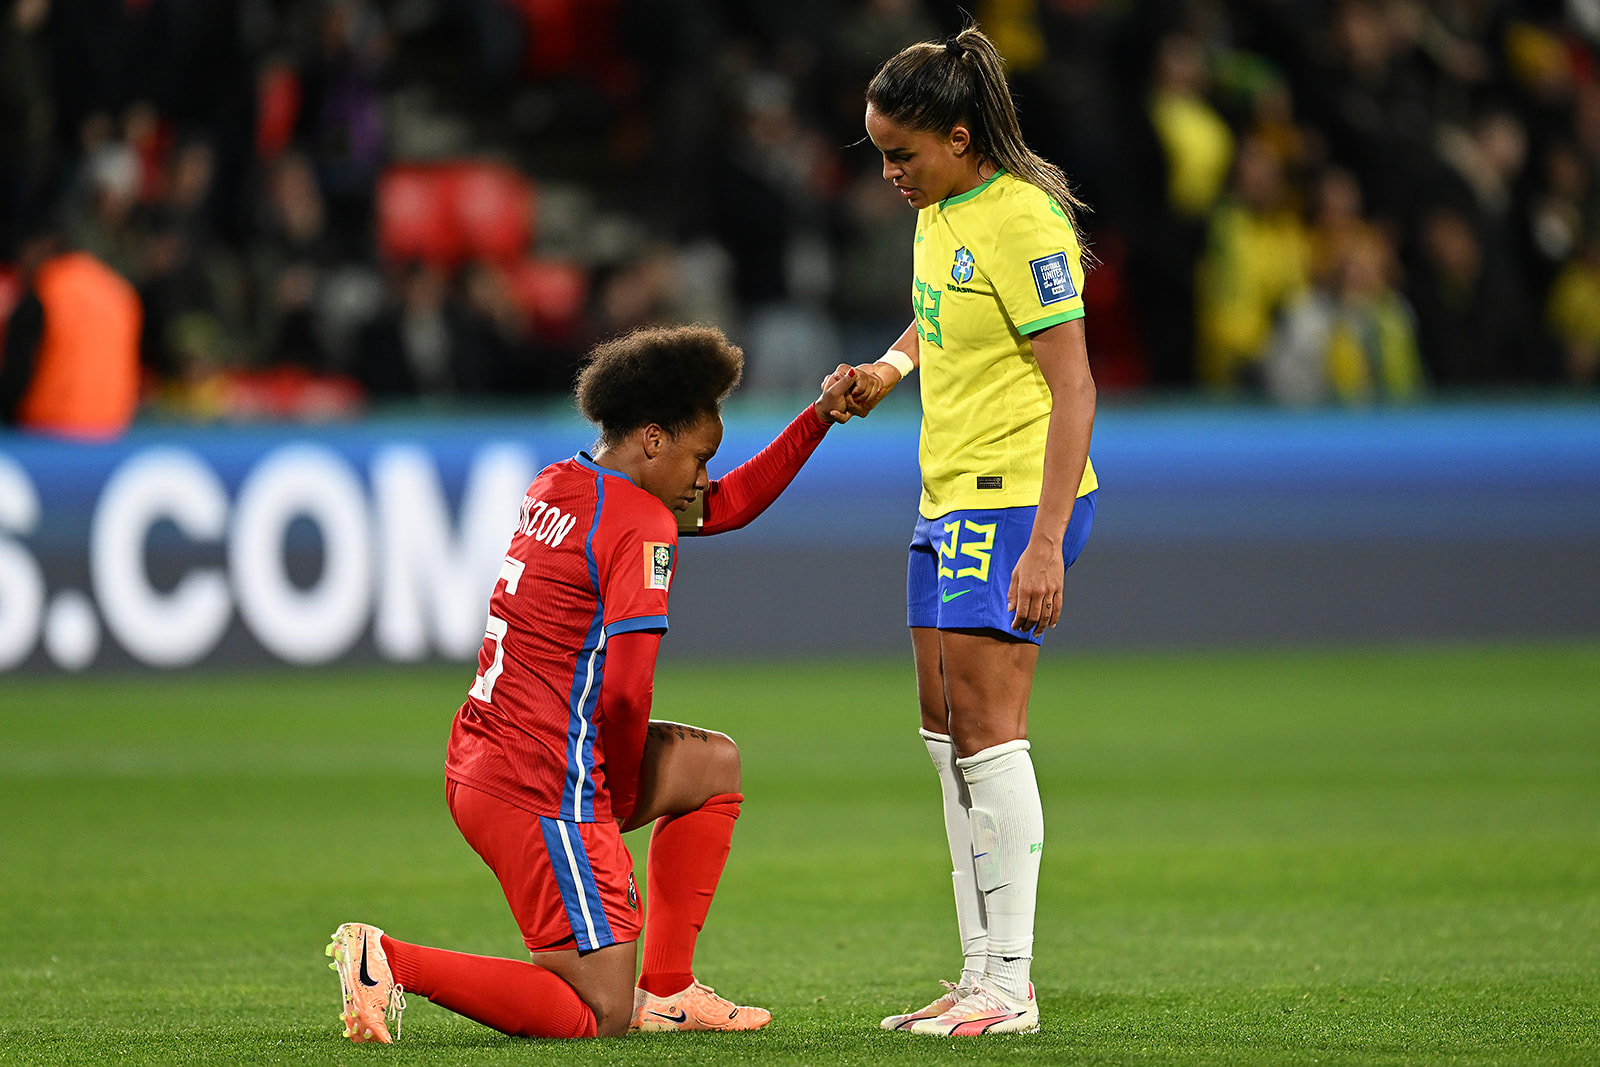 Yomira Pinzon of Panama is helped to her feet by Gabi Nunes of Brazil after the FIFA Women's World Cup match 24 July.